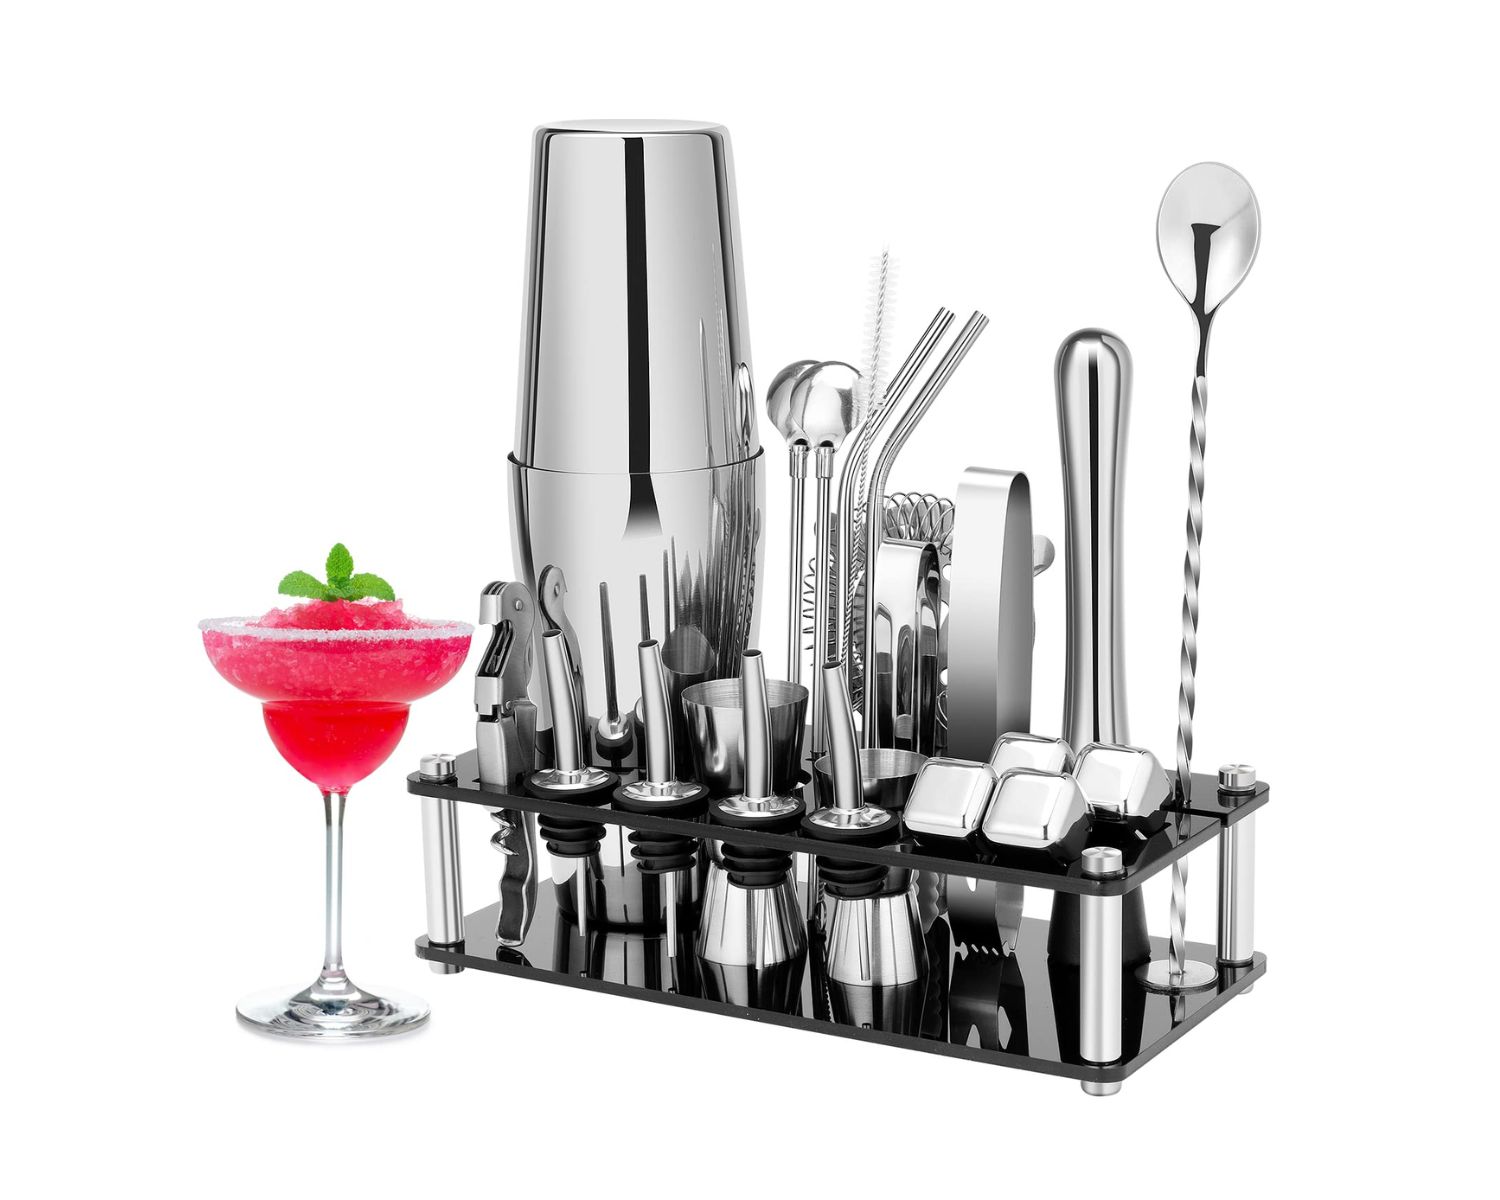 Cocktail Shaker Set Review: The Perfect Bartending Essential